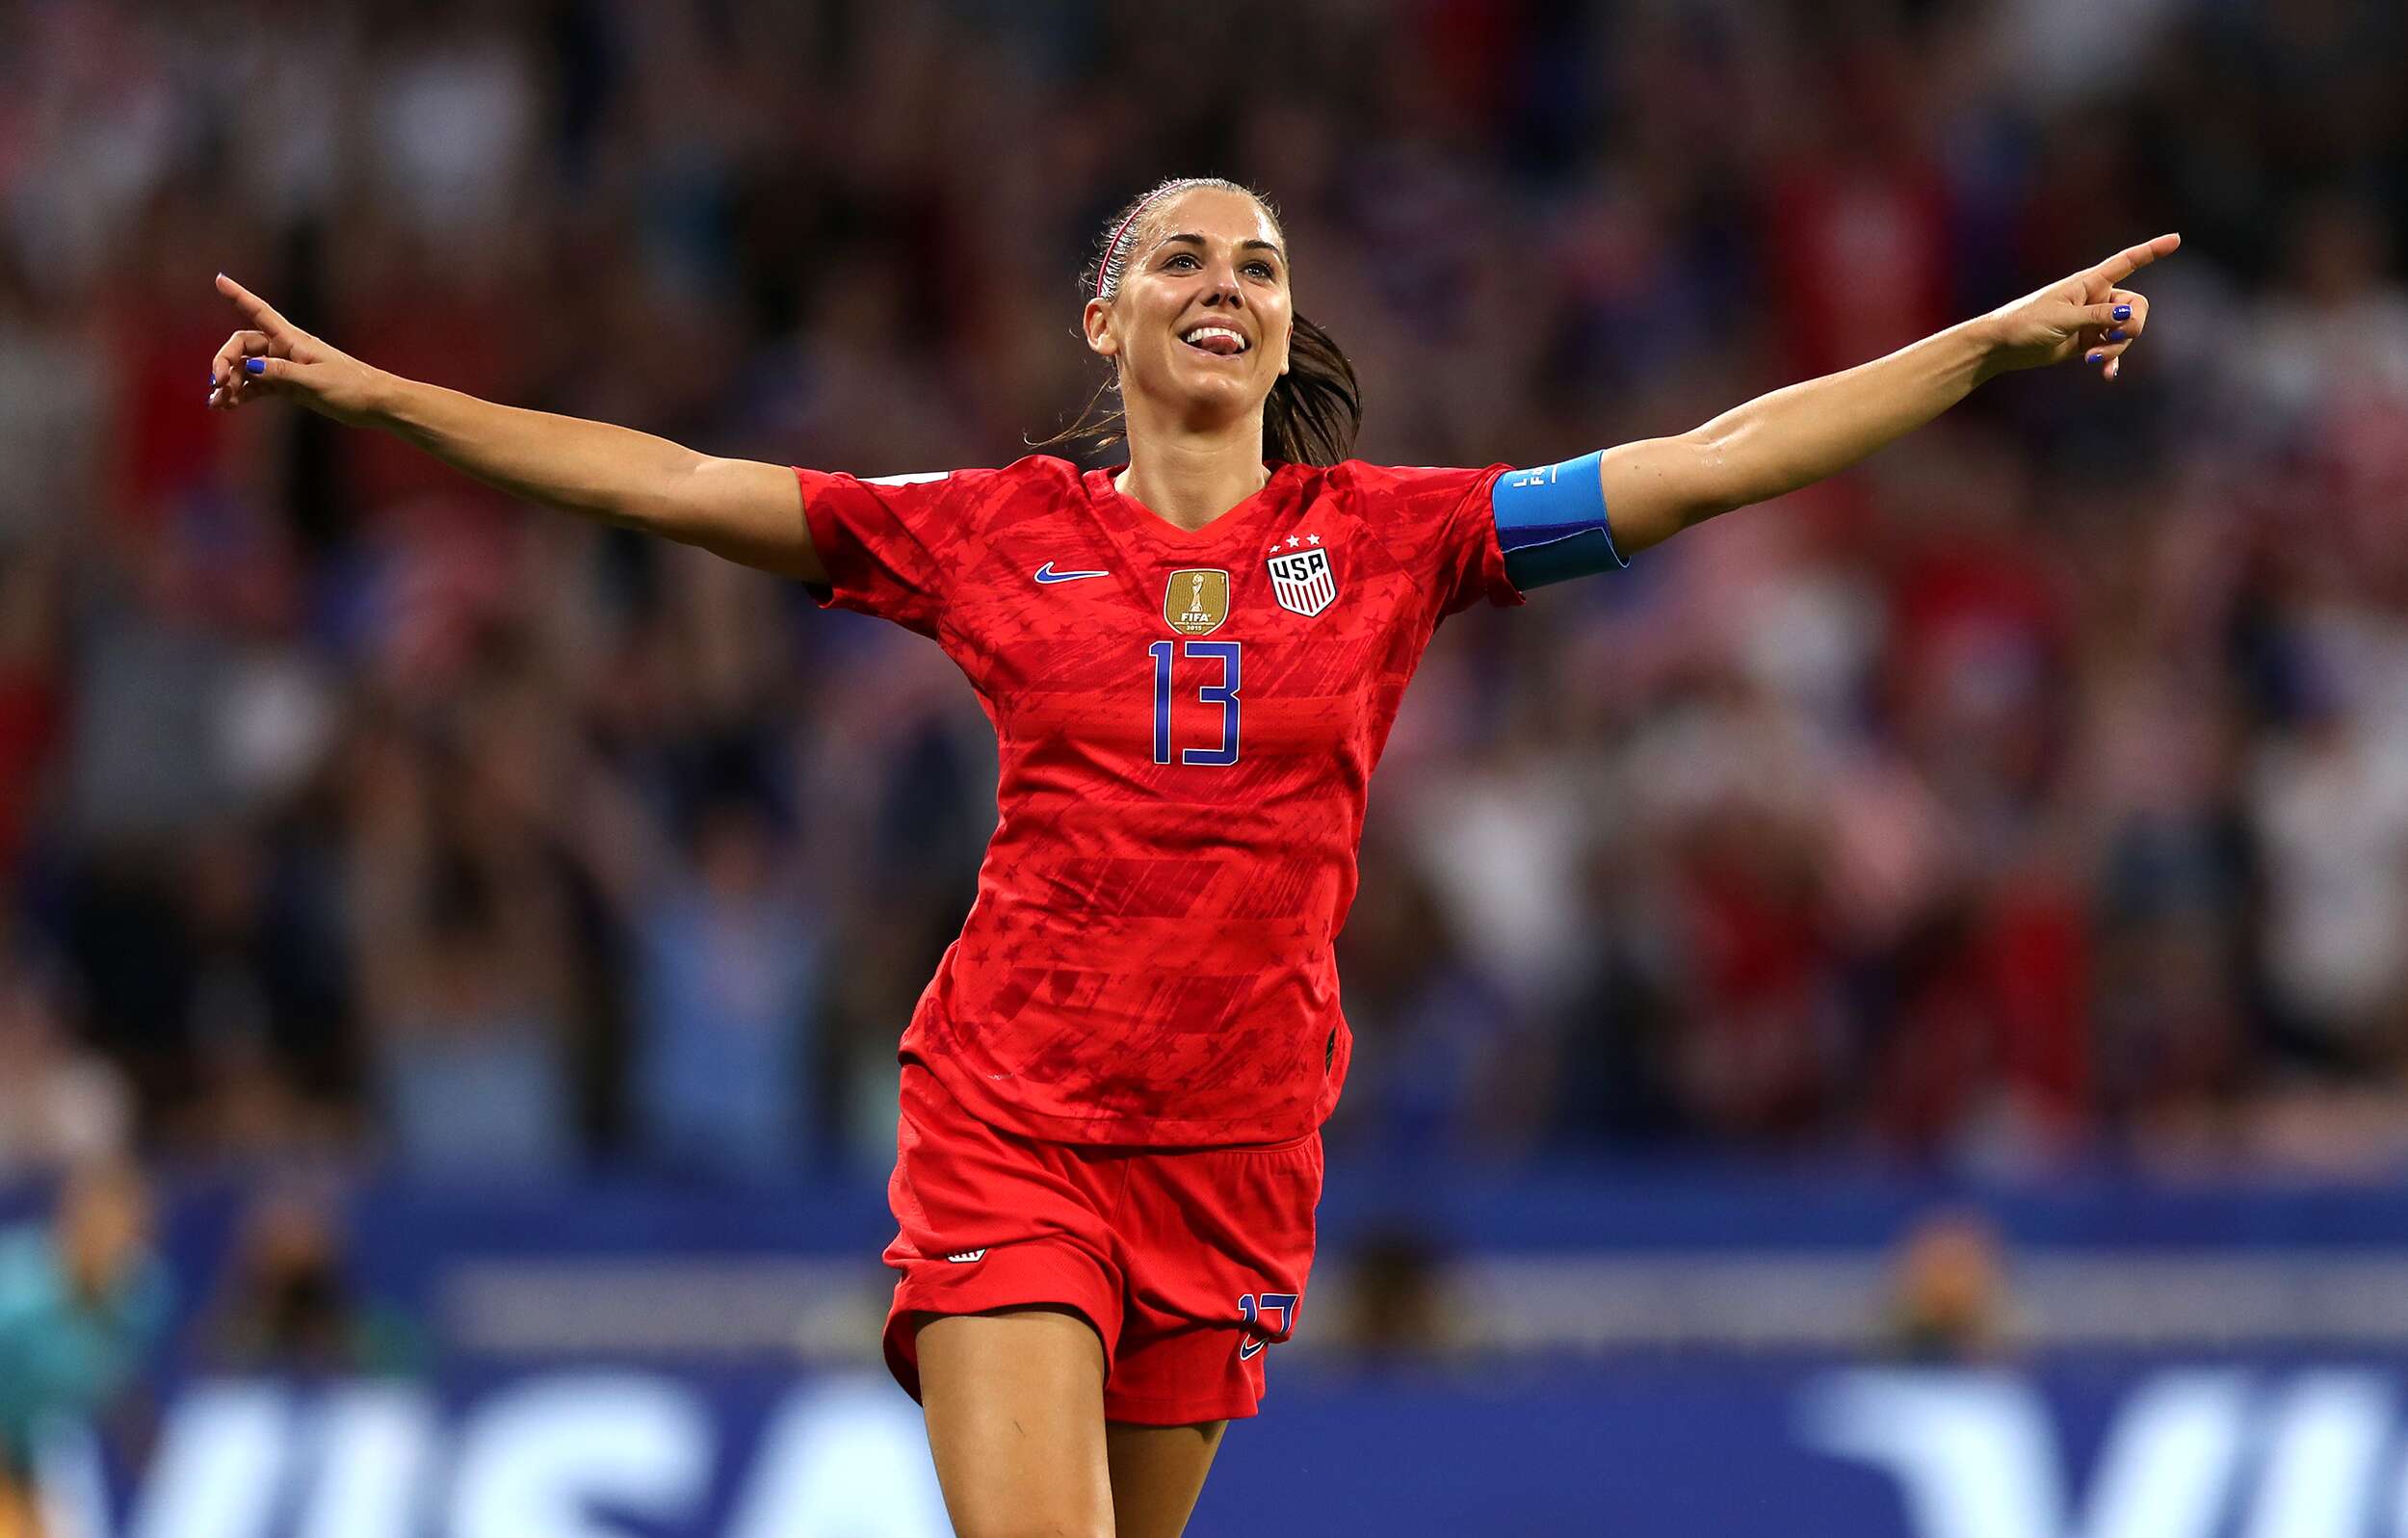 Top 7 Hottest Female Soccer Players and Pictures In 2023